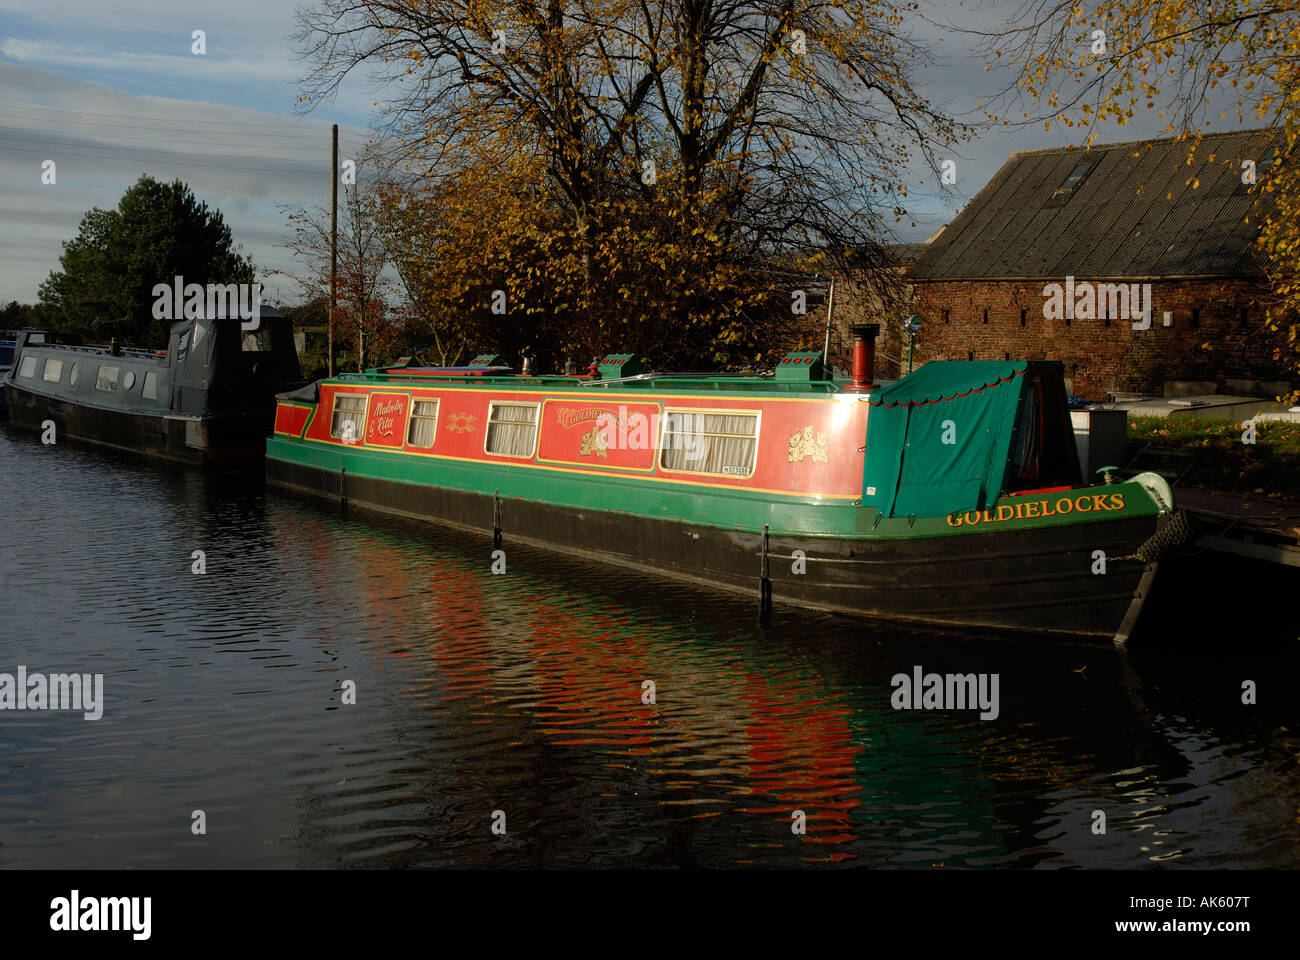 A narrowboat tied up on the Leeds Liverpool canal Stock Photo